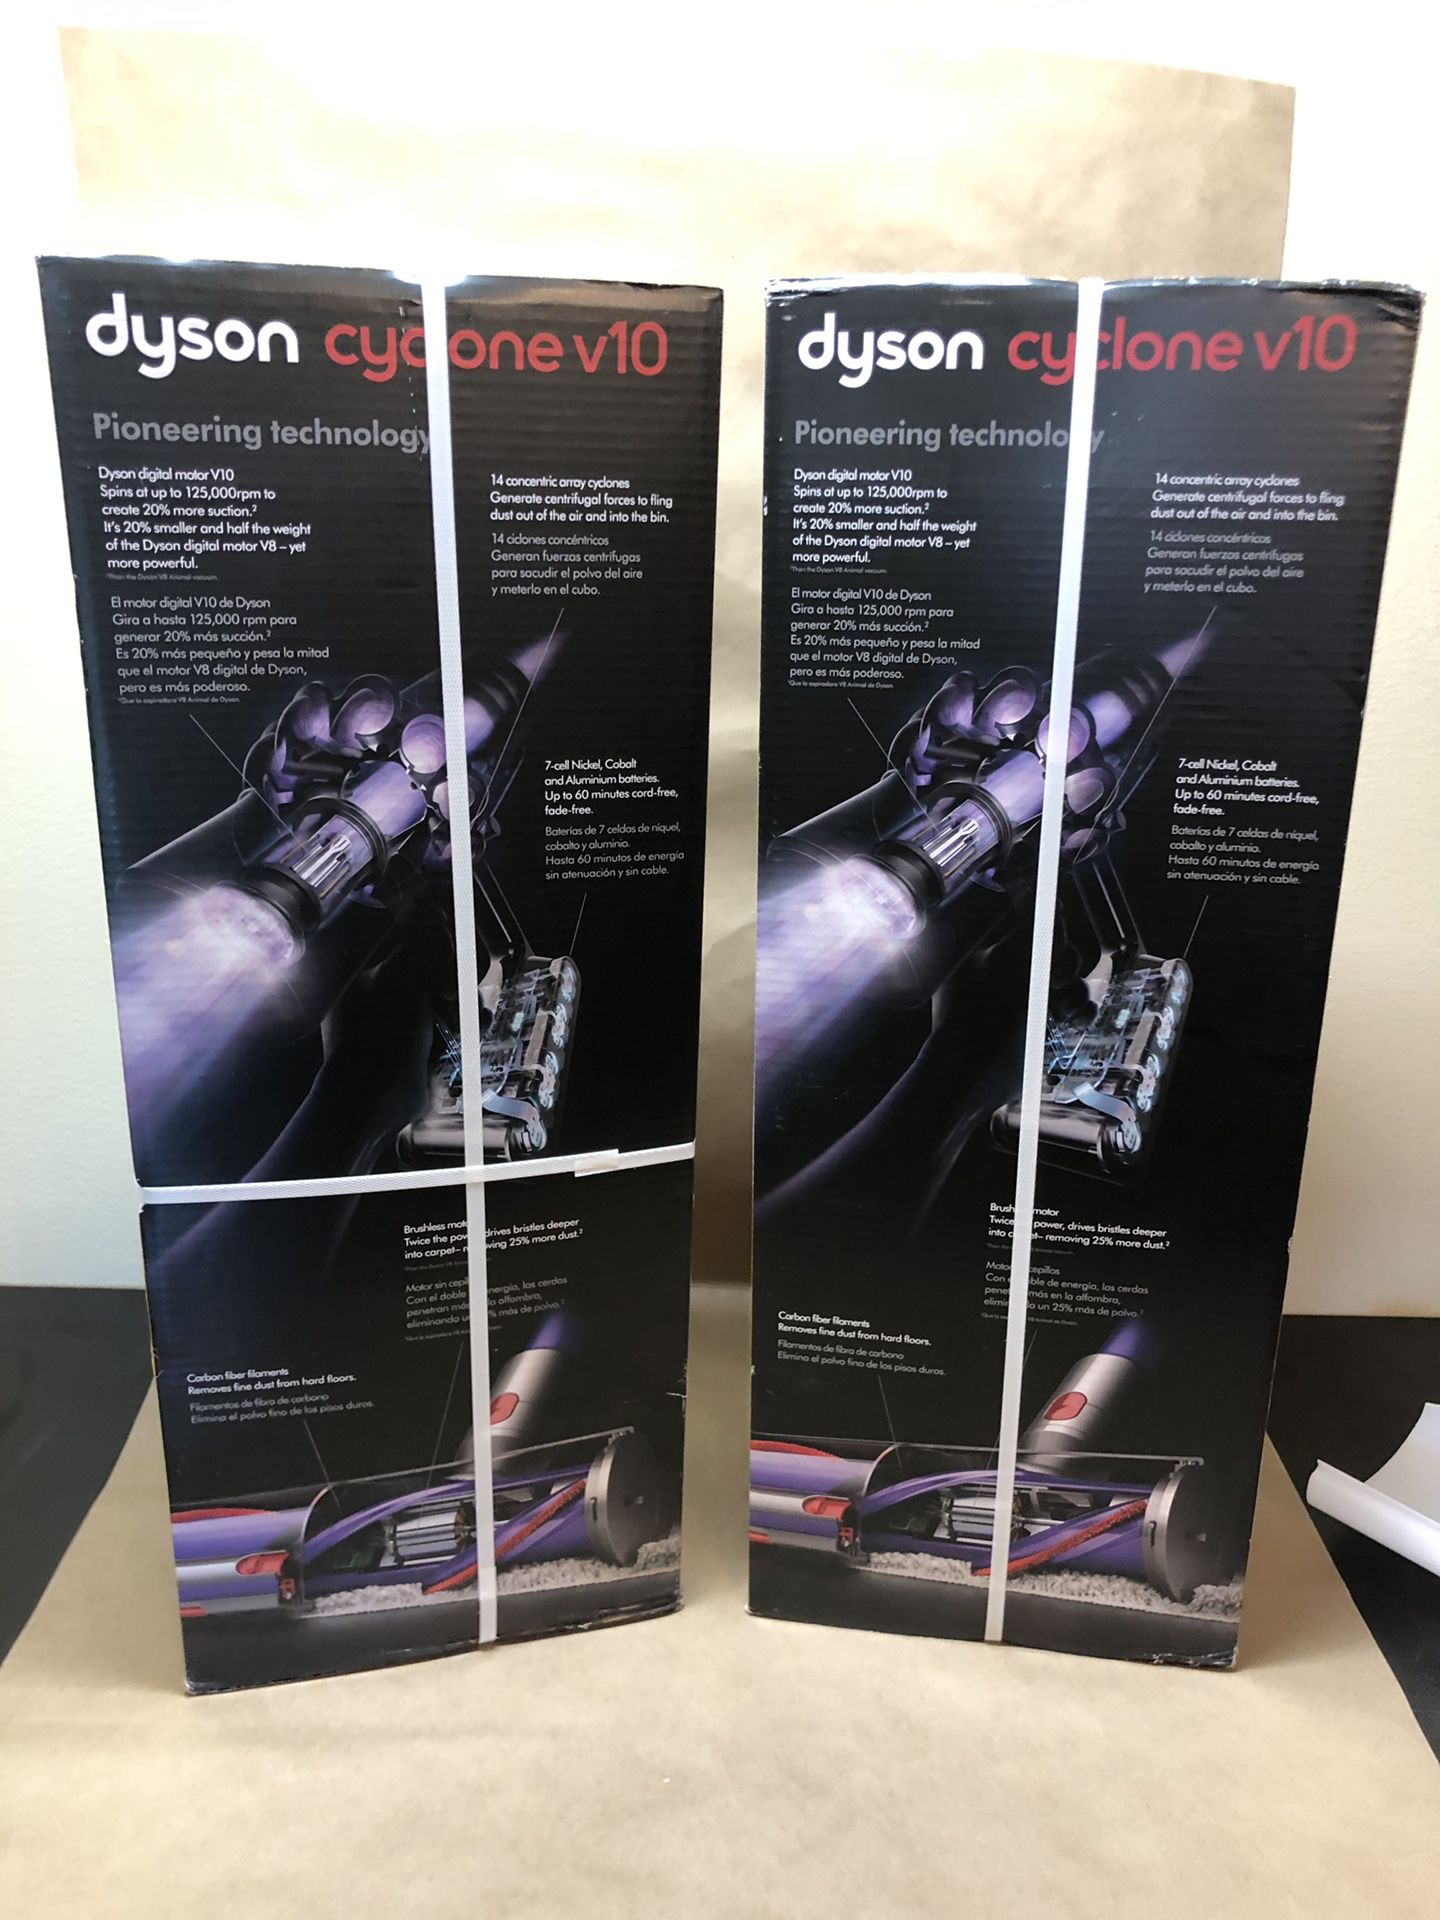 (2) Dyson cyclone v10 new in box and (1) Dyson optimum